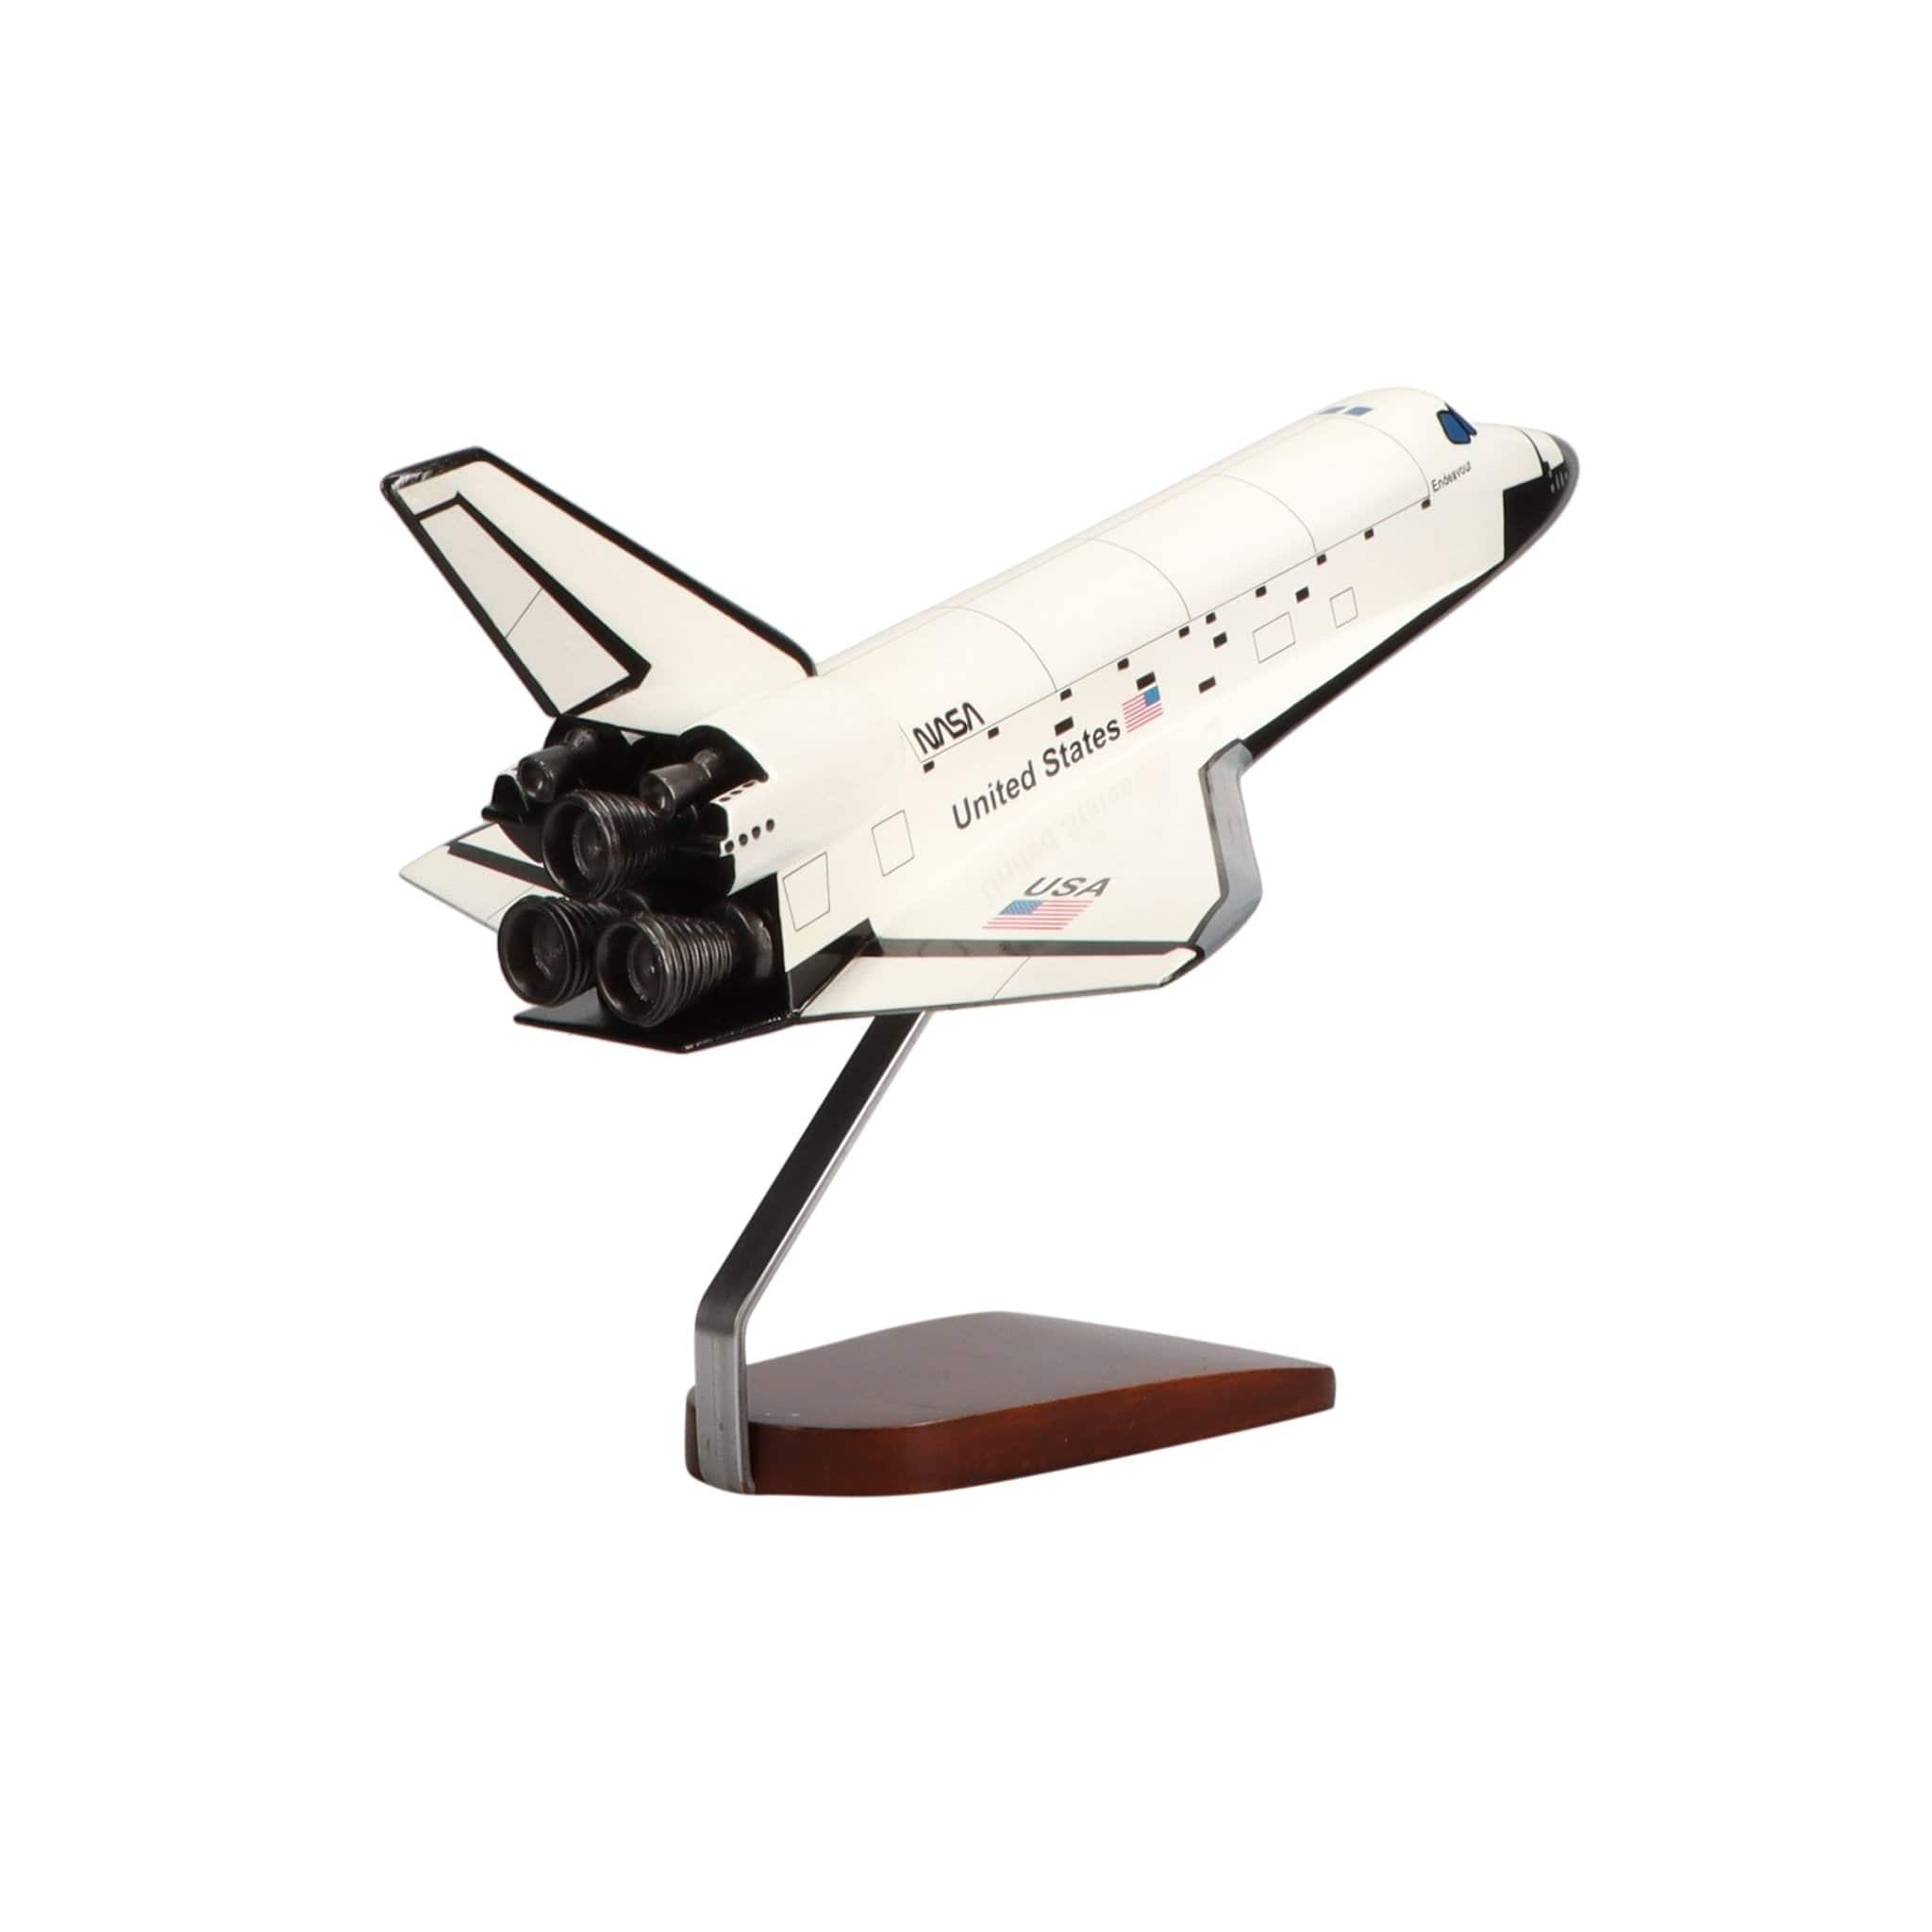 Space Shuttle Endeavour Orbiter OV-105 Limited Edition Large Mahogany Model - PilotMall.com